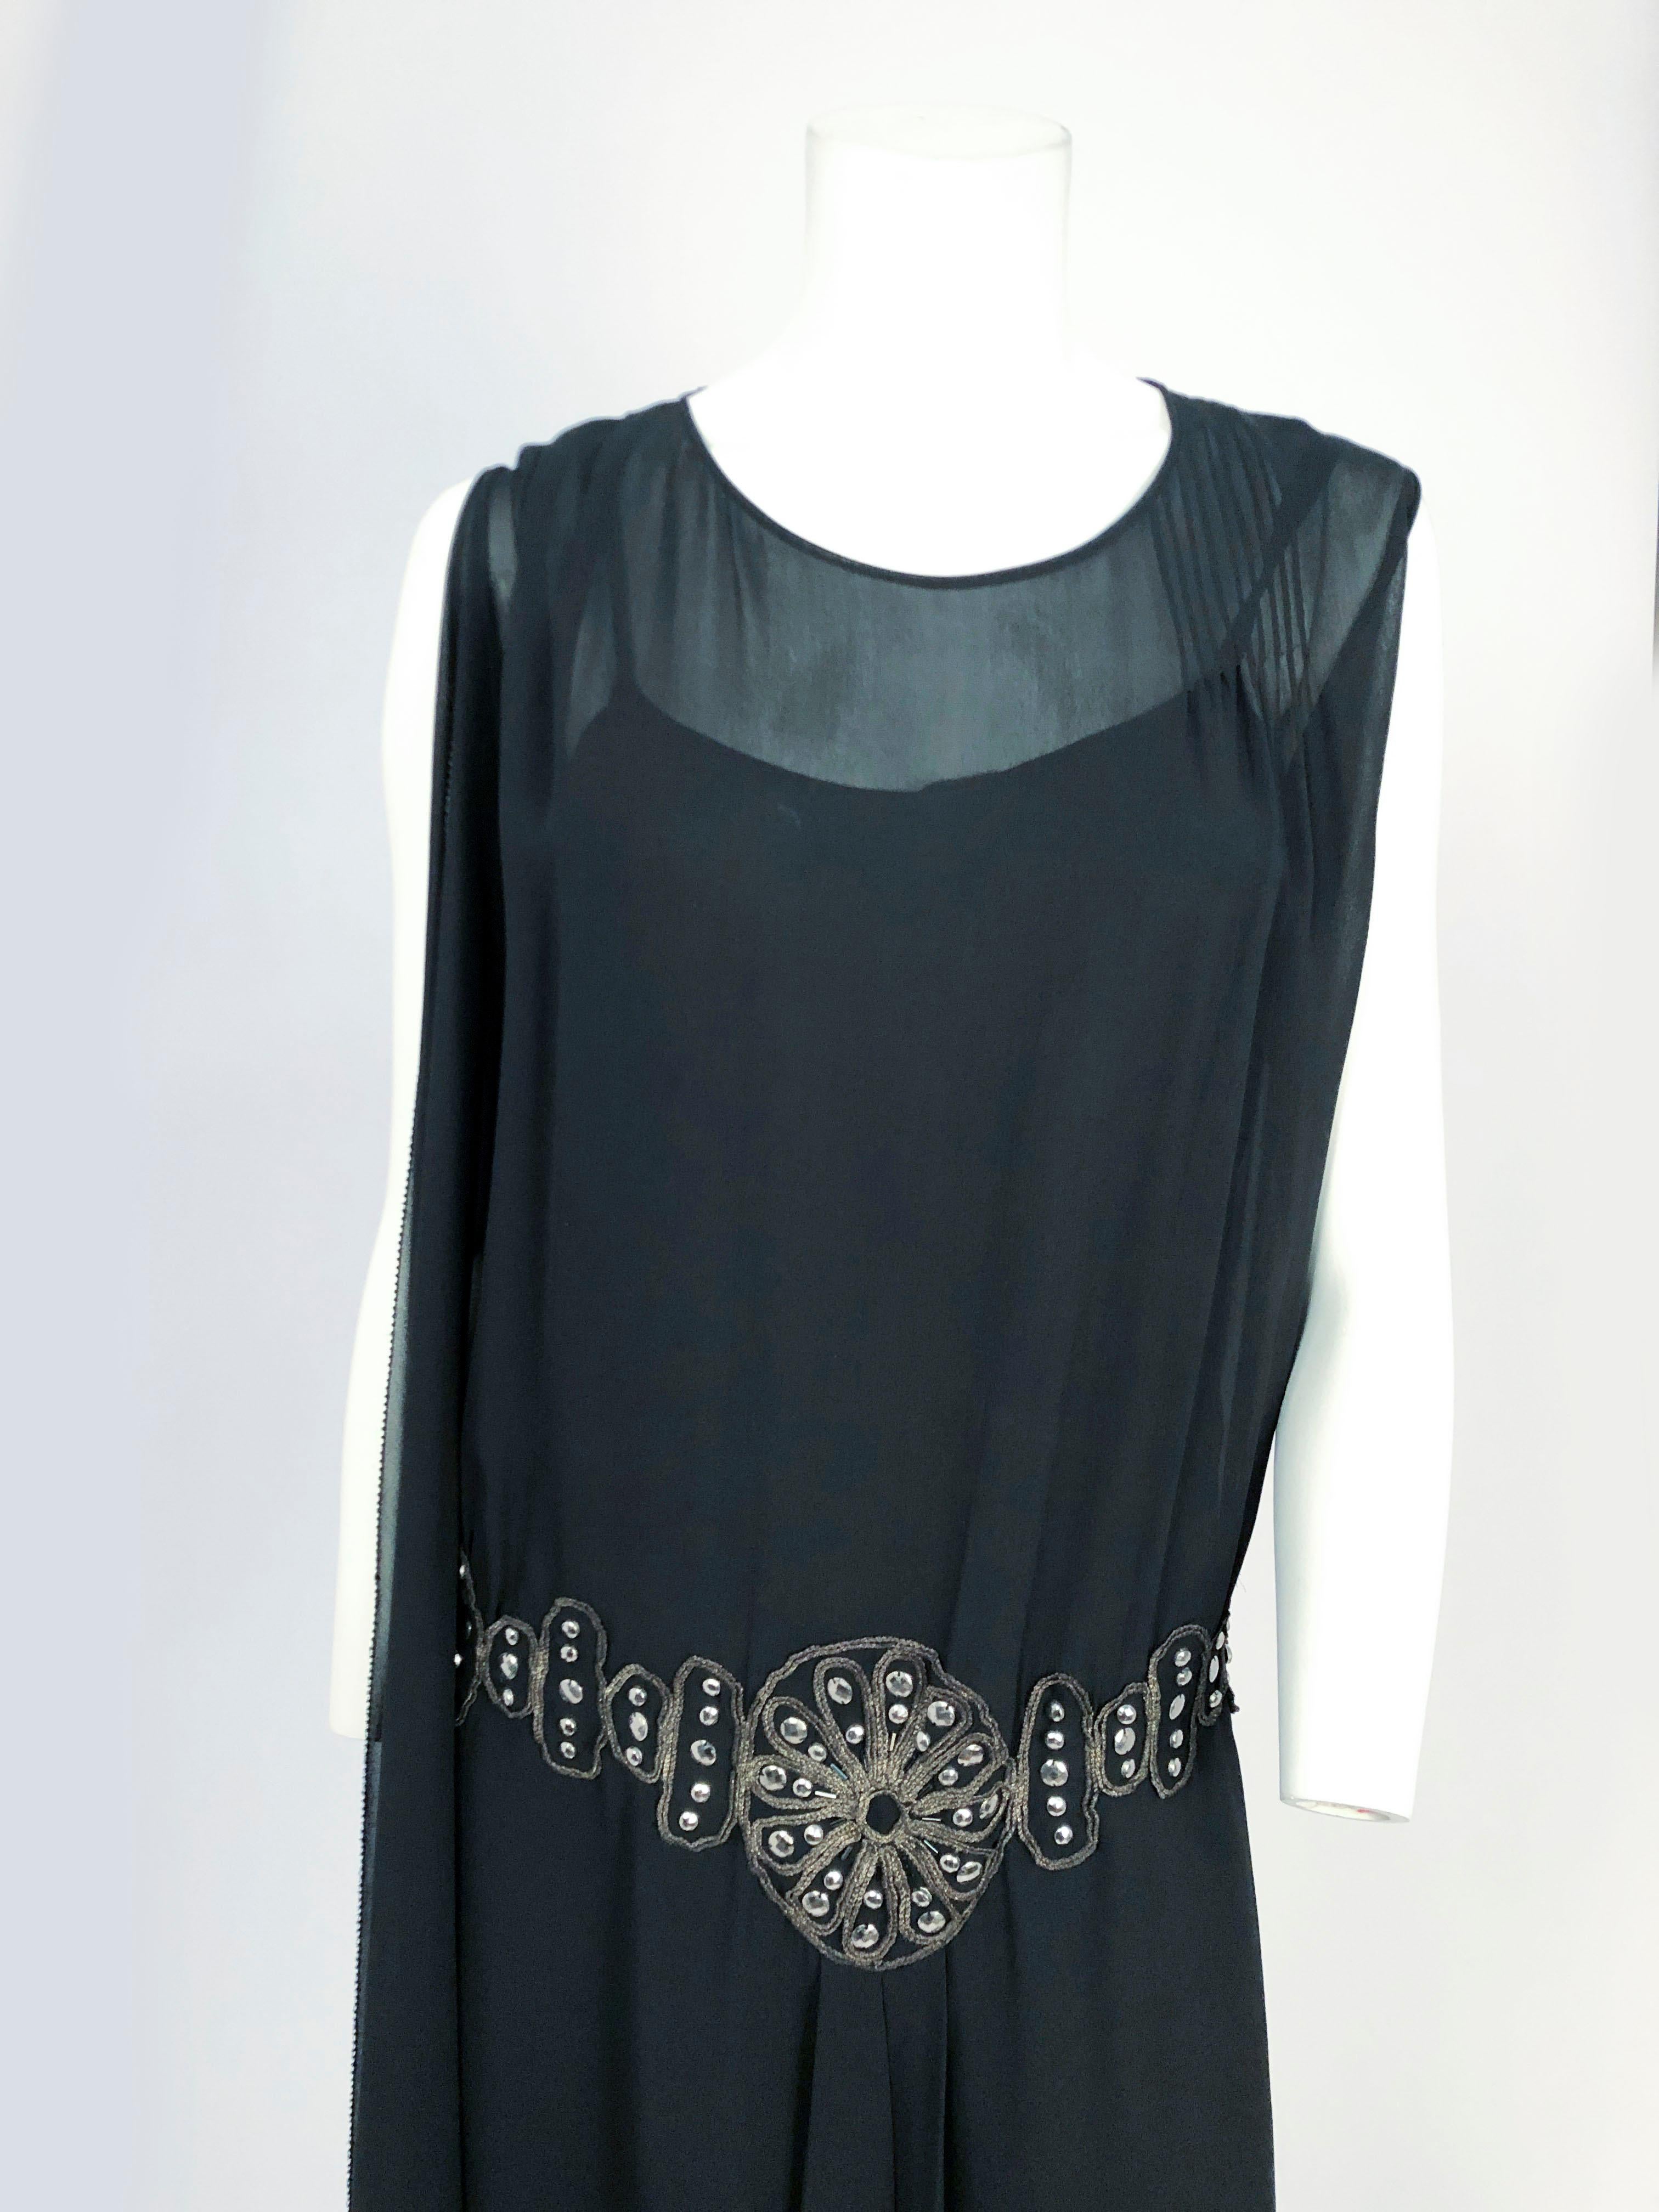 1920s Black Drop-waist Dress With Beading and Drape Accents. The hand appliqué is trimmed in lamé rope and rounded studs. The shoulder has a georgette drape and the face of the dress is pleated and open along the skirt.